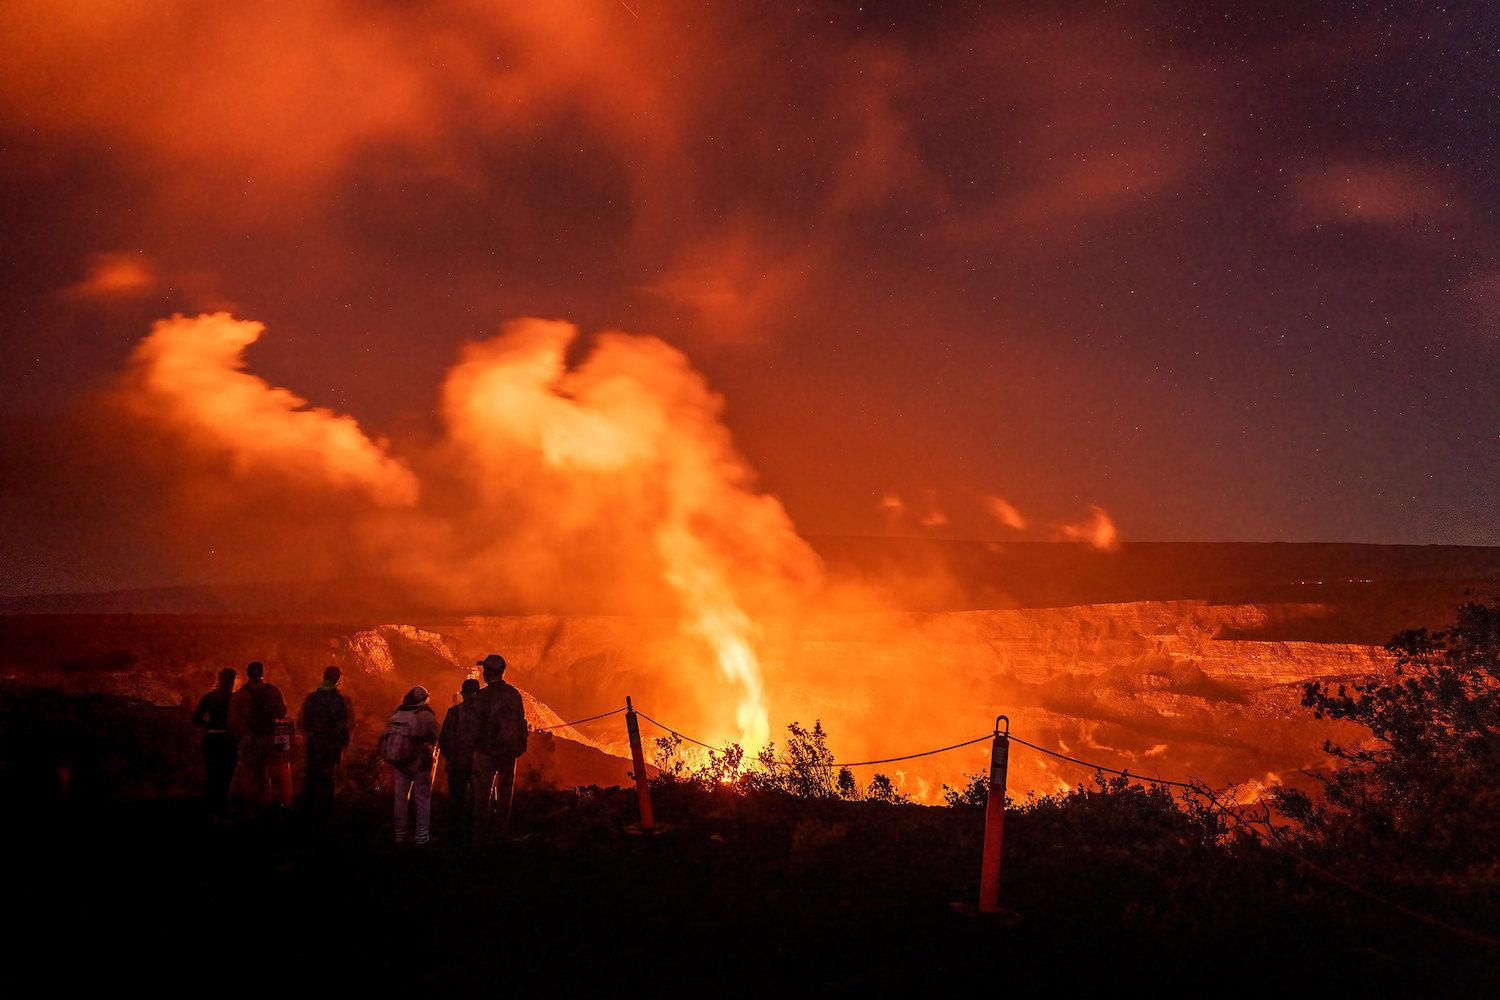 Night-time viewing of Kīlauea's eruptions is a main draw at Hawai'i Volcanoes National Park/NPS, Janice Wei